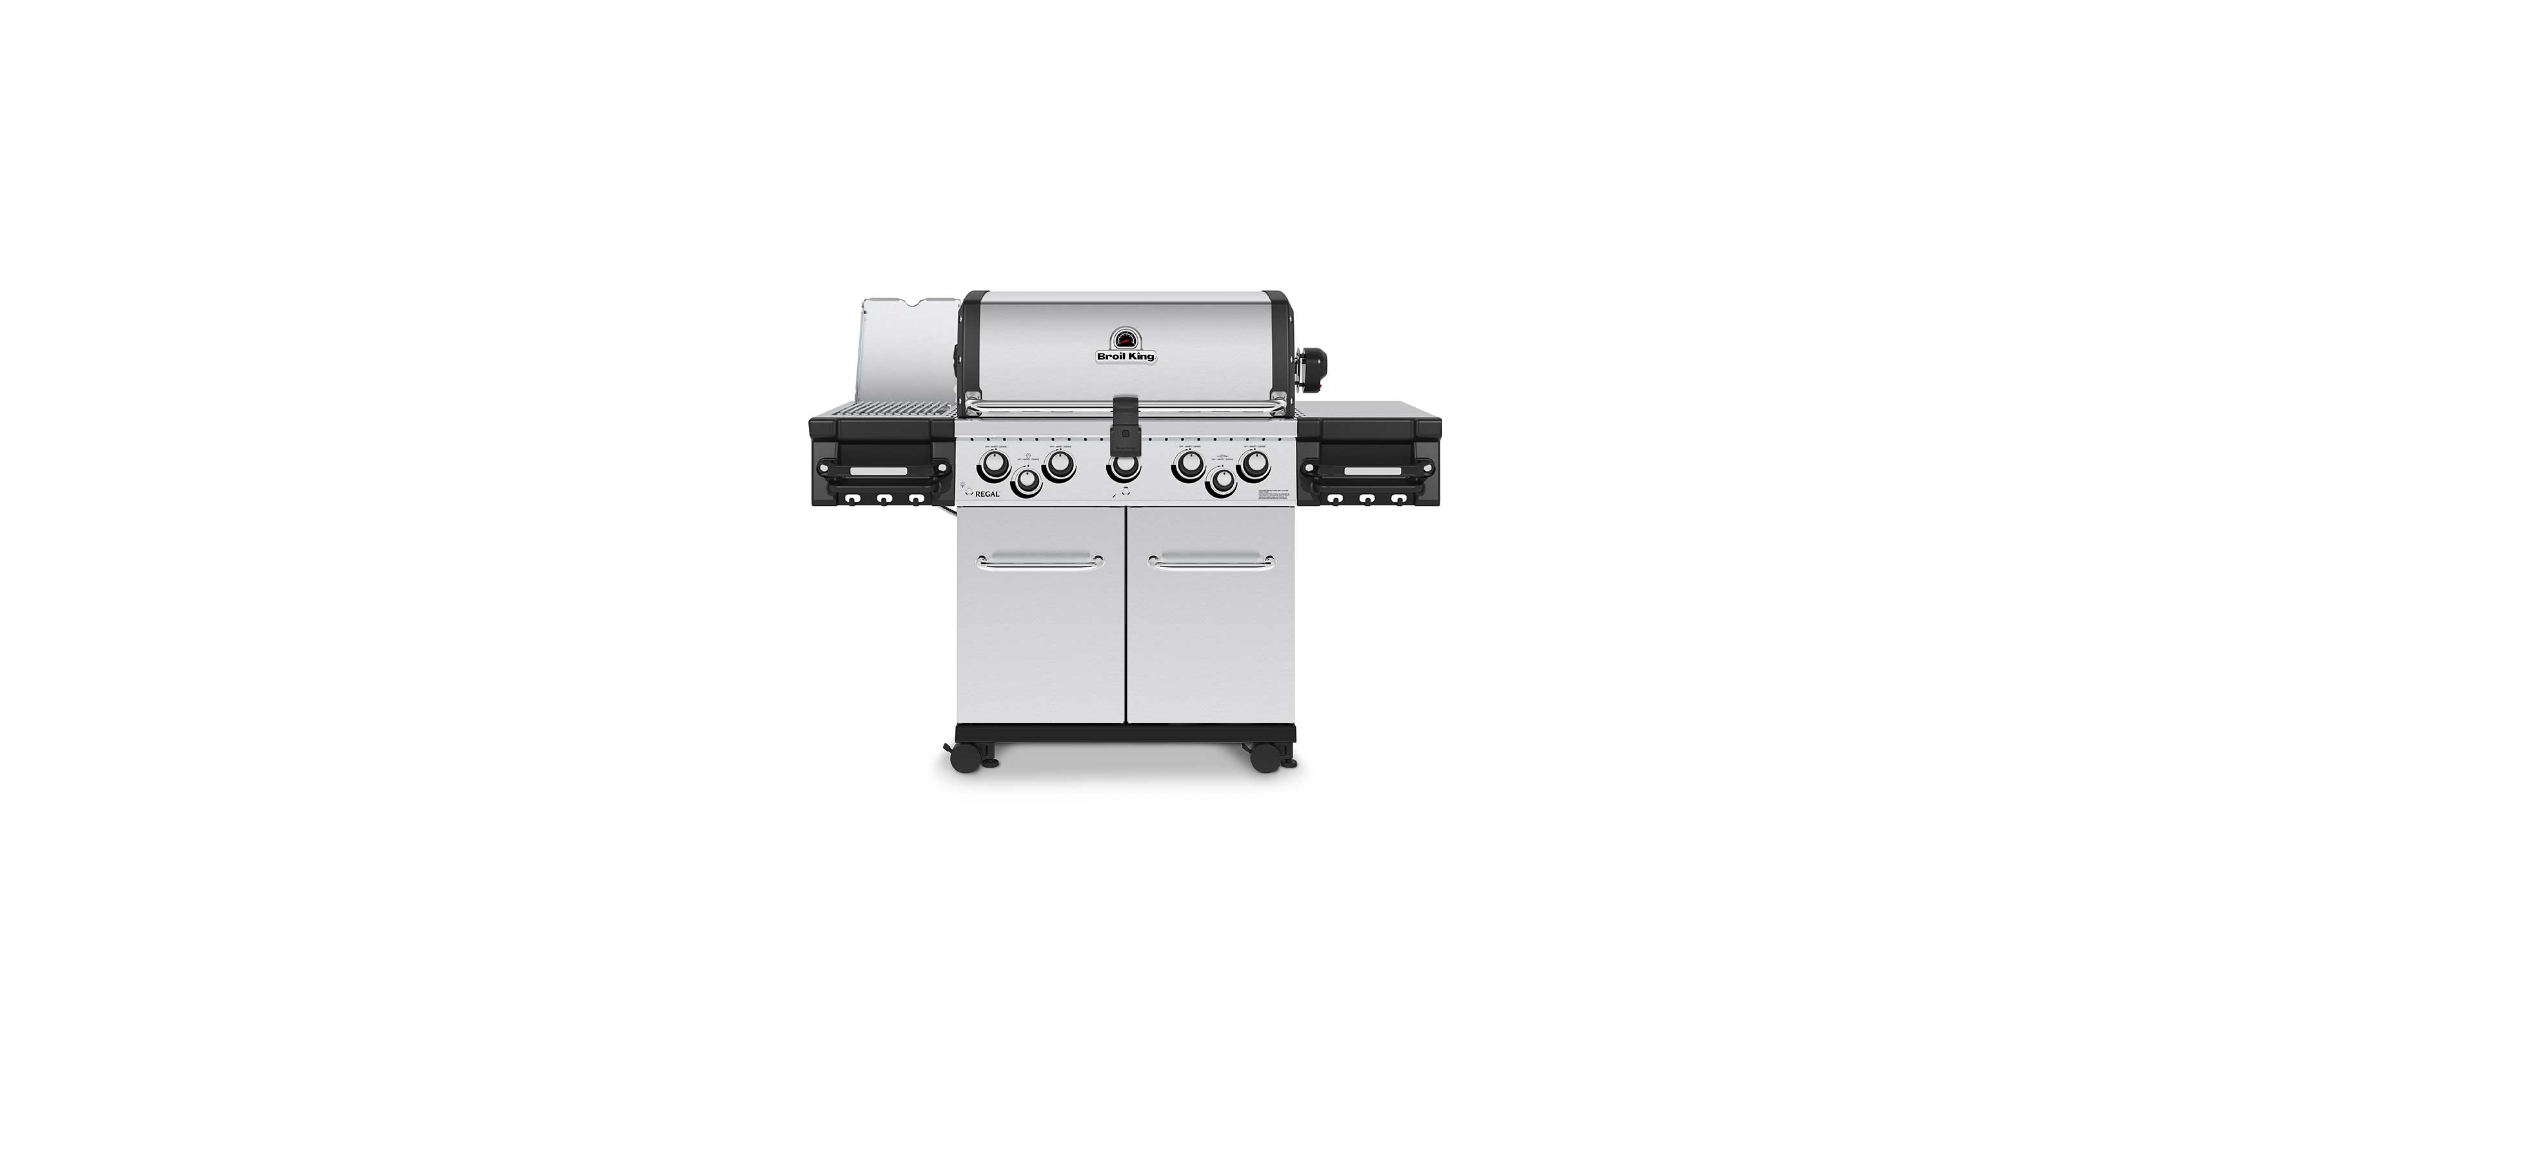 Broil-King-50084-S35-Broil-King-User-Manual-prduct-img